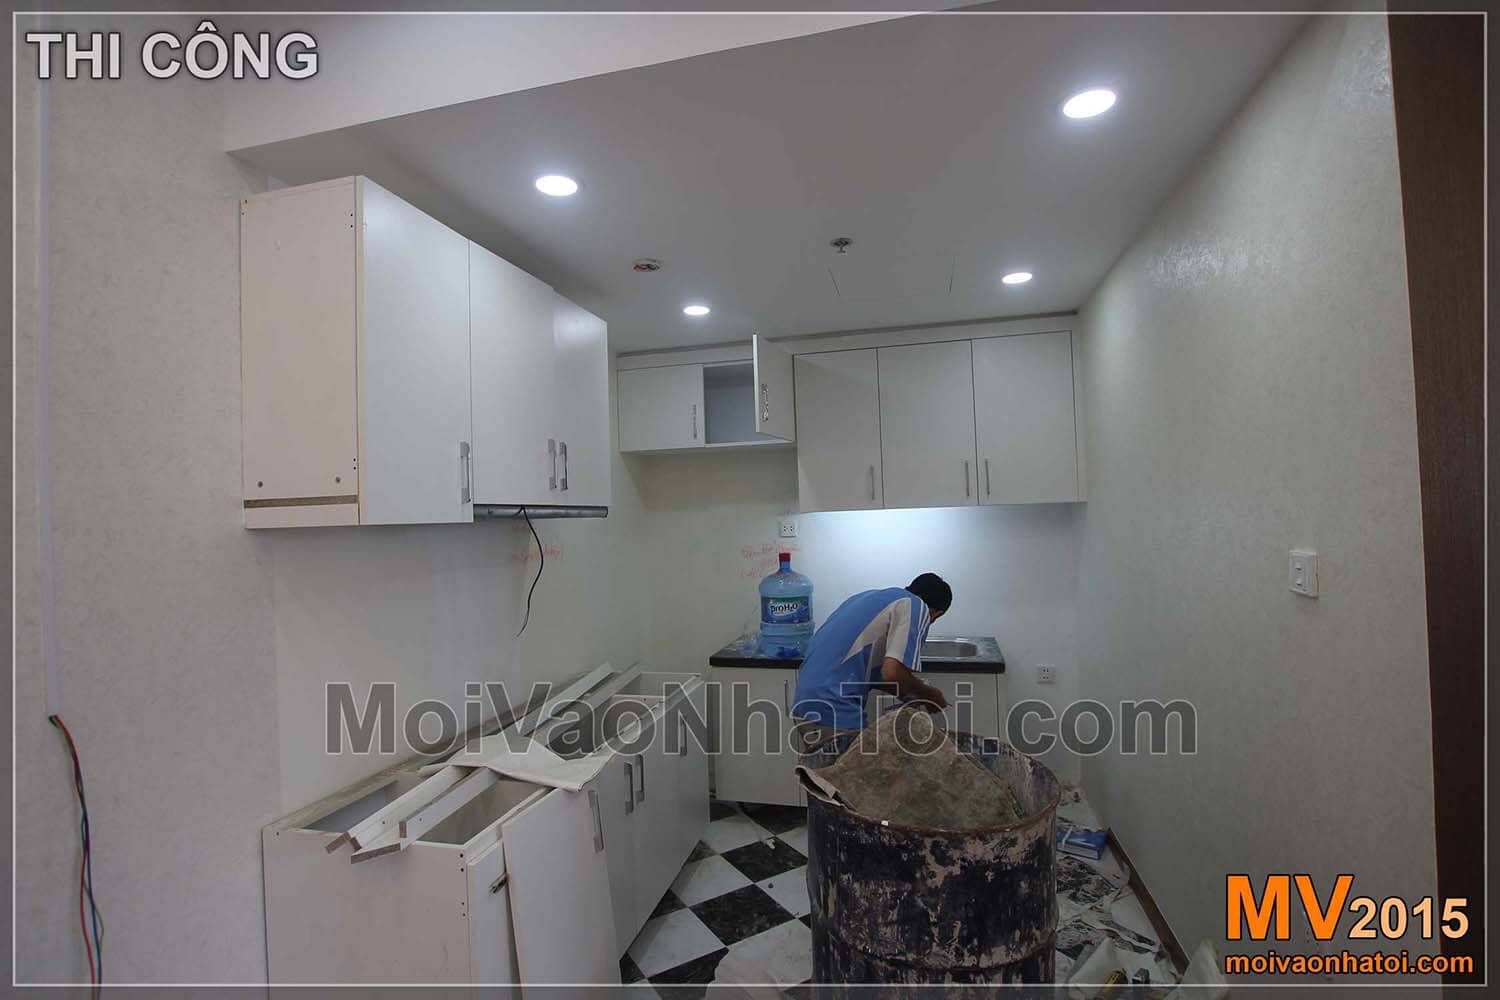 Construction process of apartment kitchen cabinets